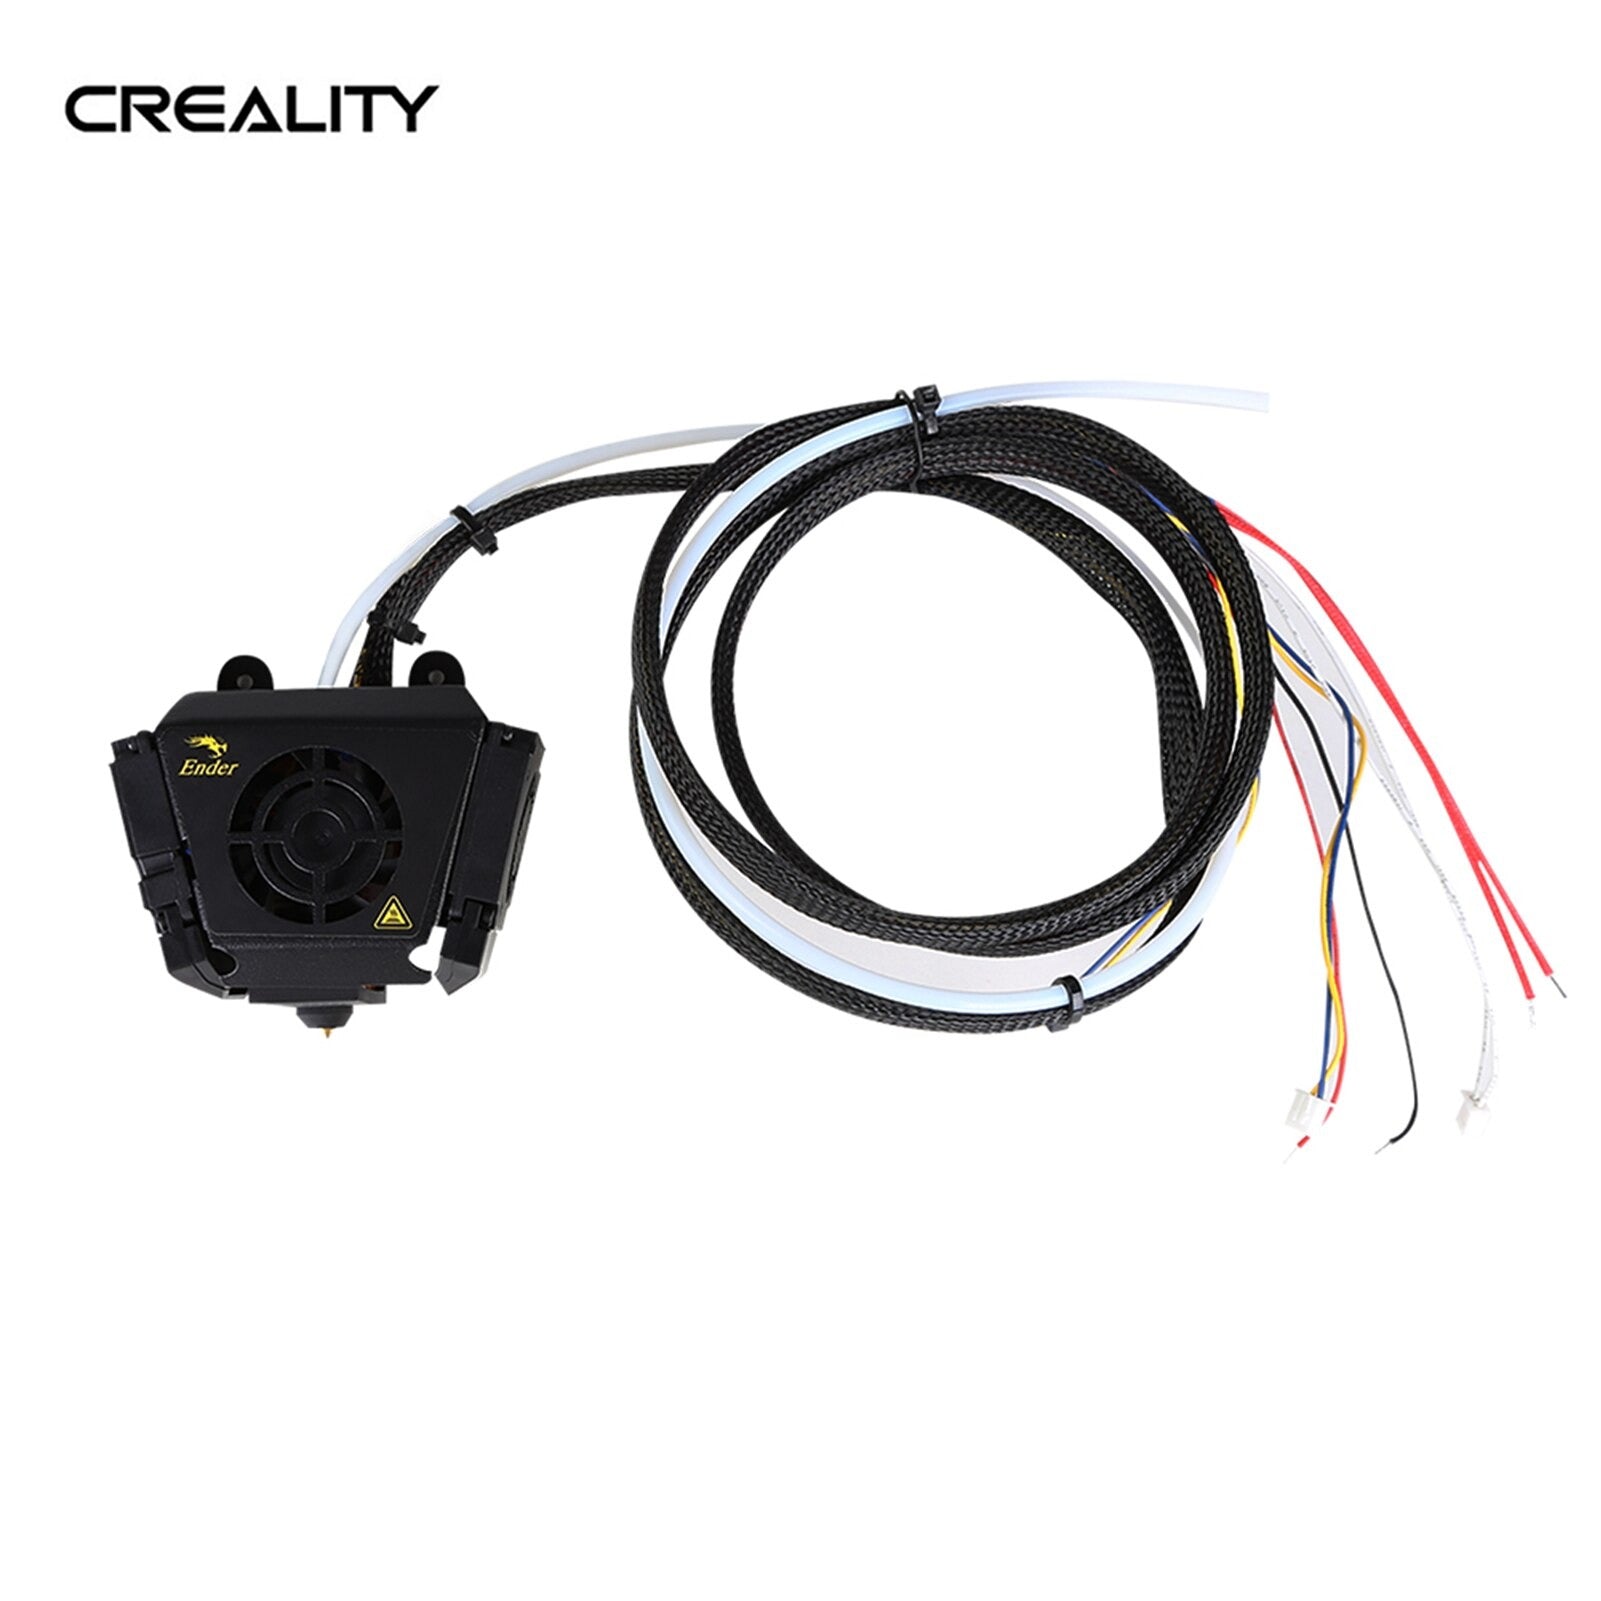 Creality 3D Ender 3 Max Hotend Assembly, Technology Outlet